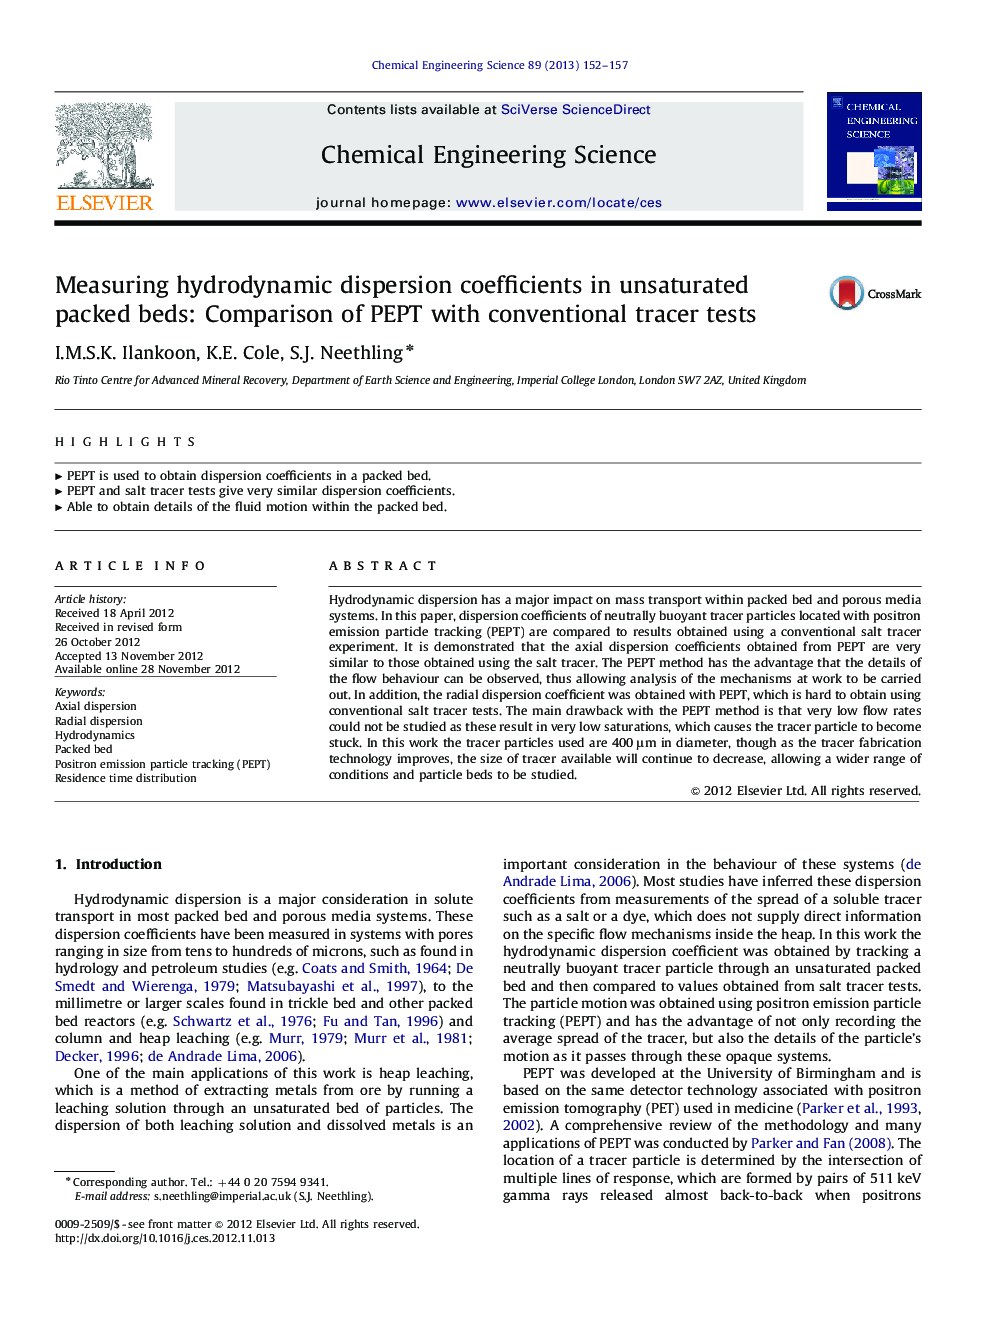 Measuring hydrodynamic dispersion coefficients in unsaturated packed beds: Comparison of PEPT with conventional tracer tests